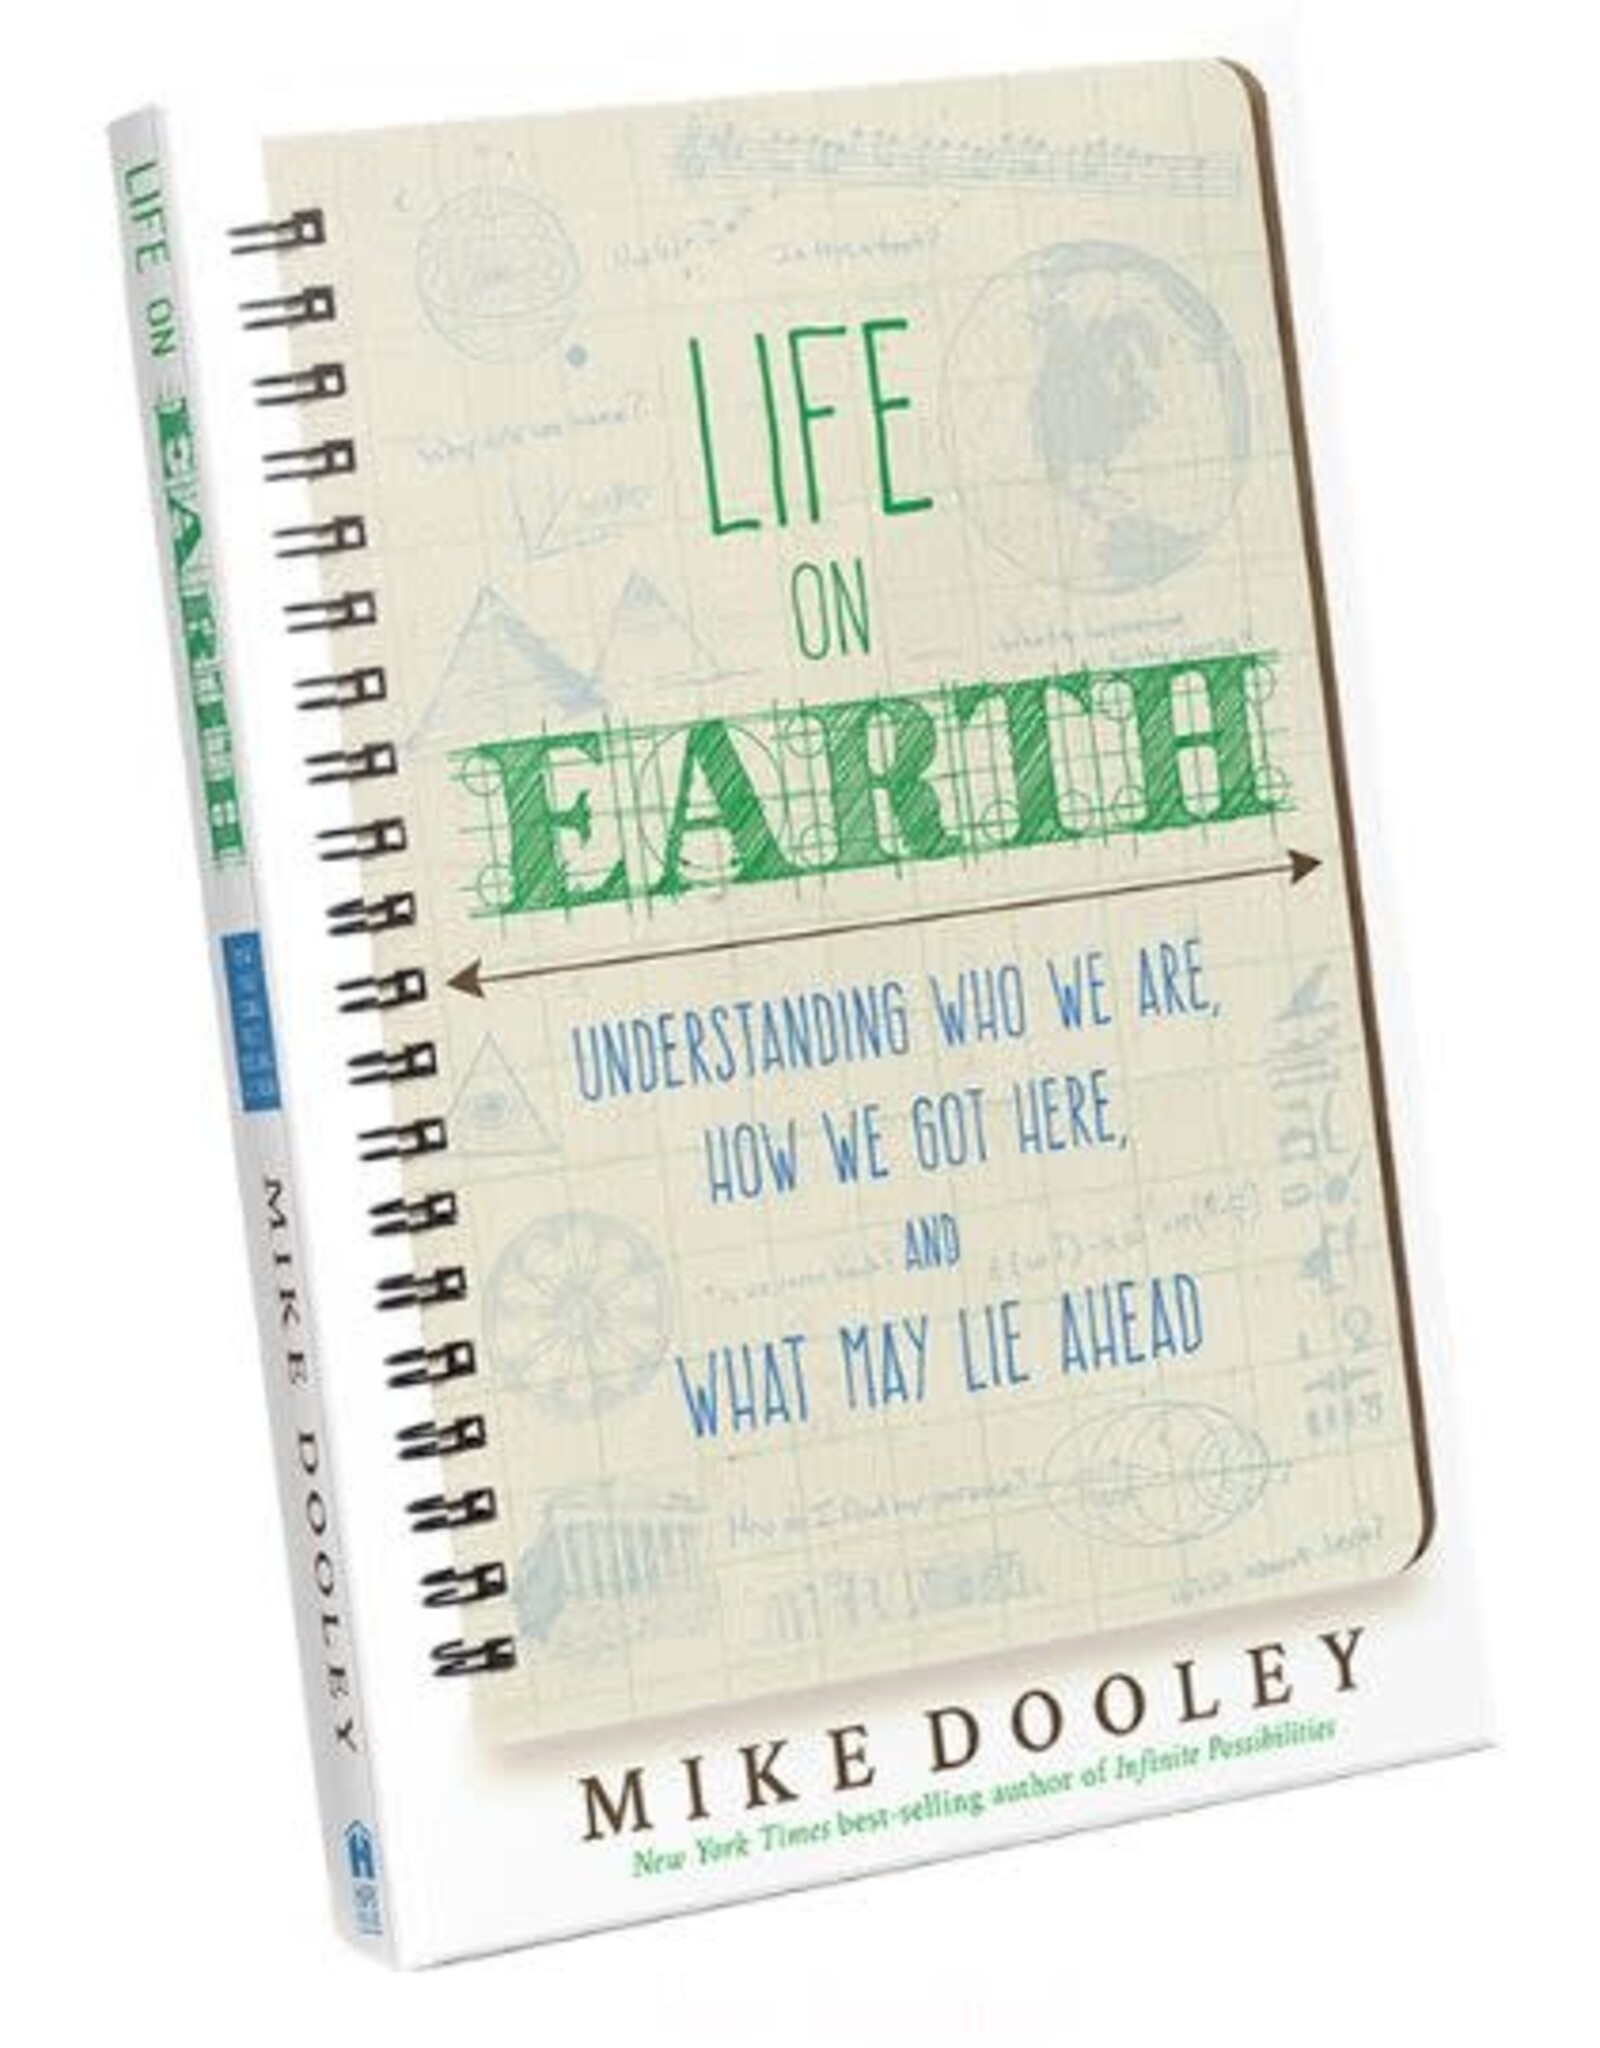 Mike Dooley Life on Earth by Mike Dooley